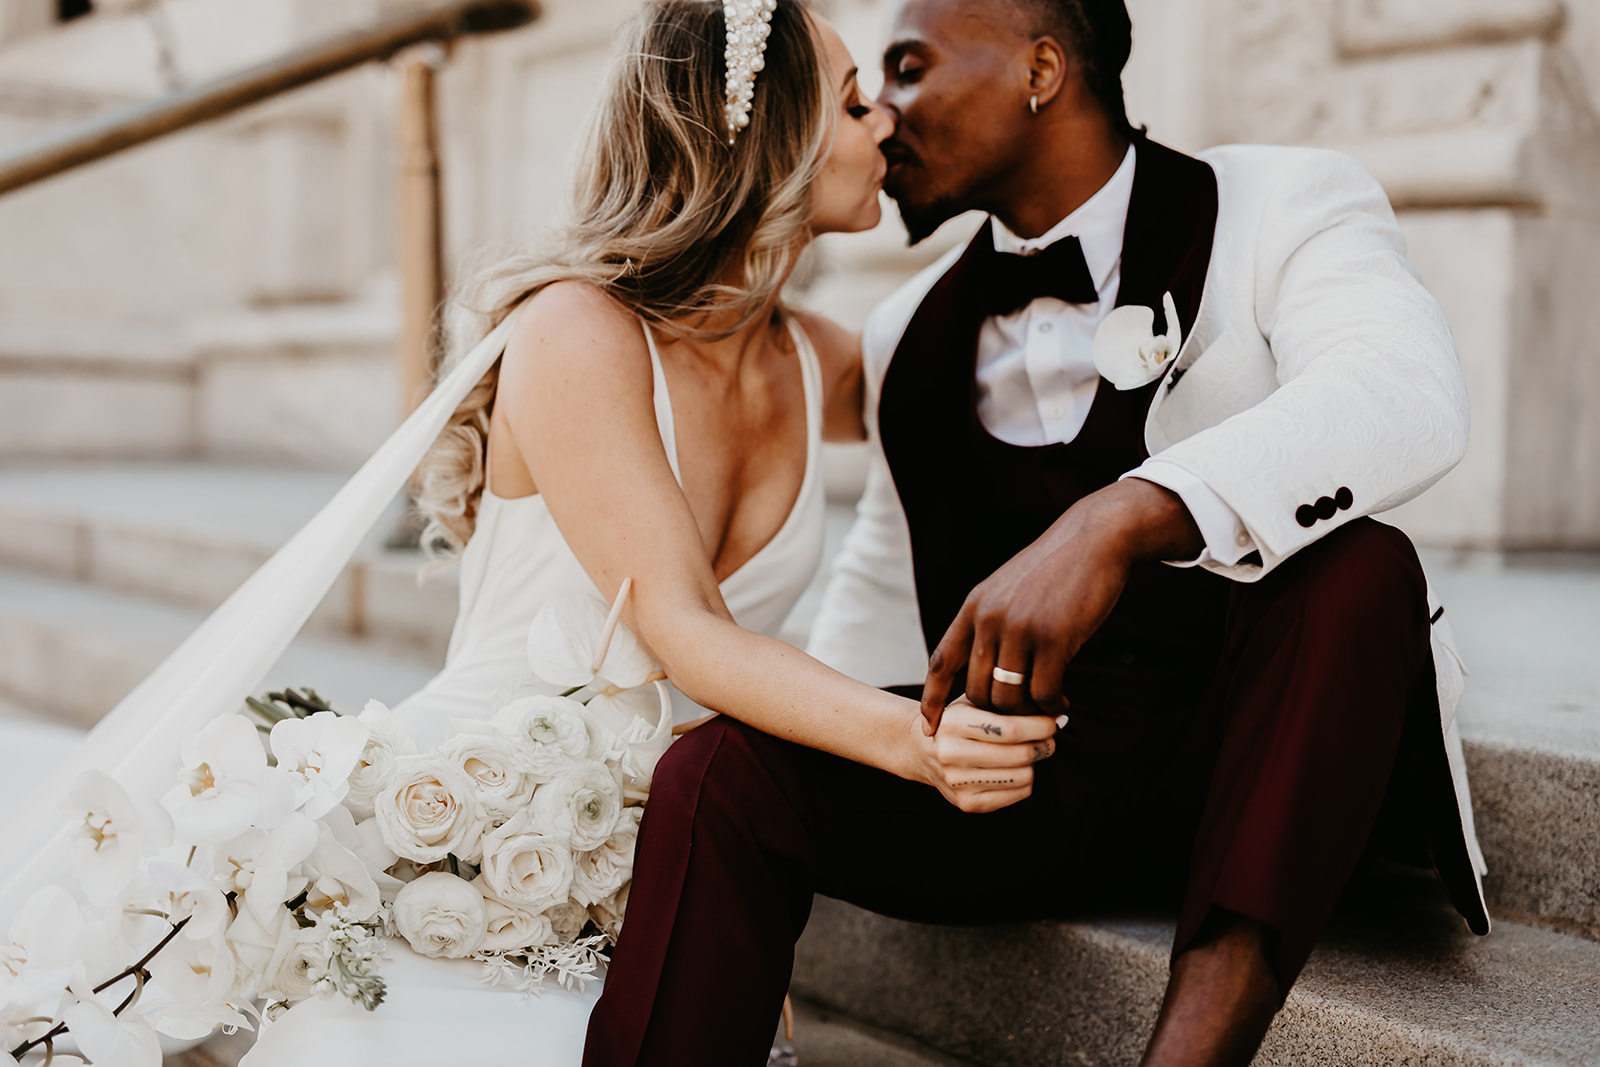 Chic and fashionable wedding portrait in downtown Cleveland - showcasing the couple's impeccable style.